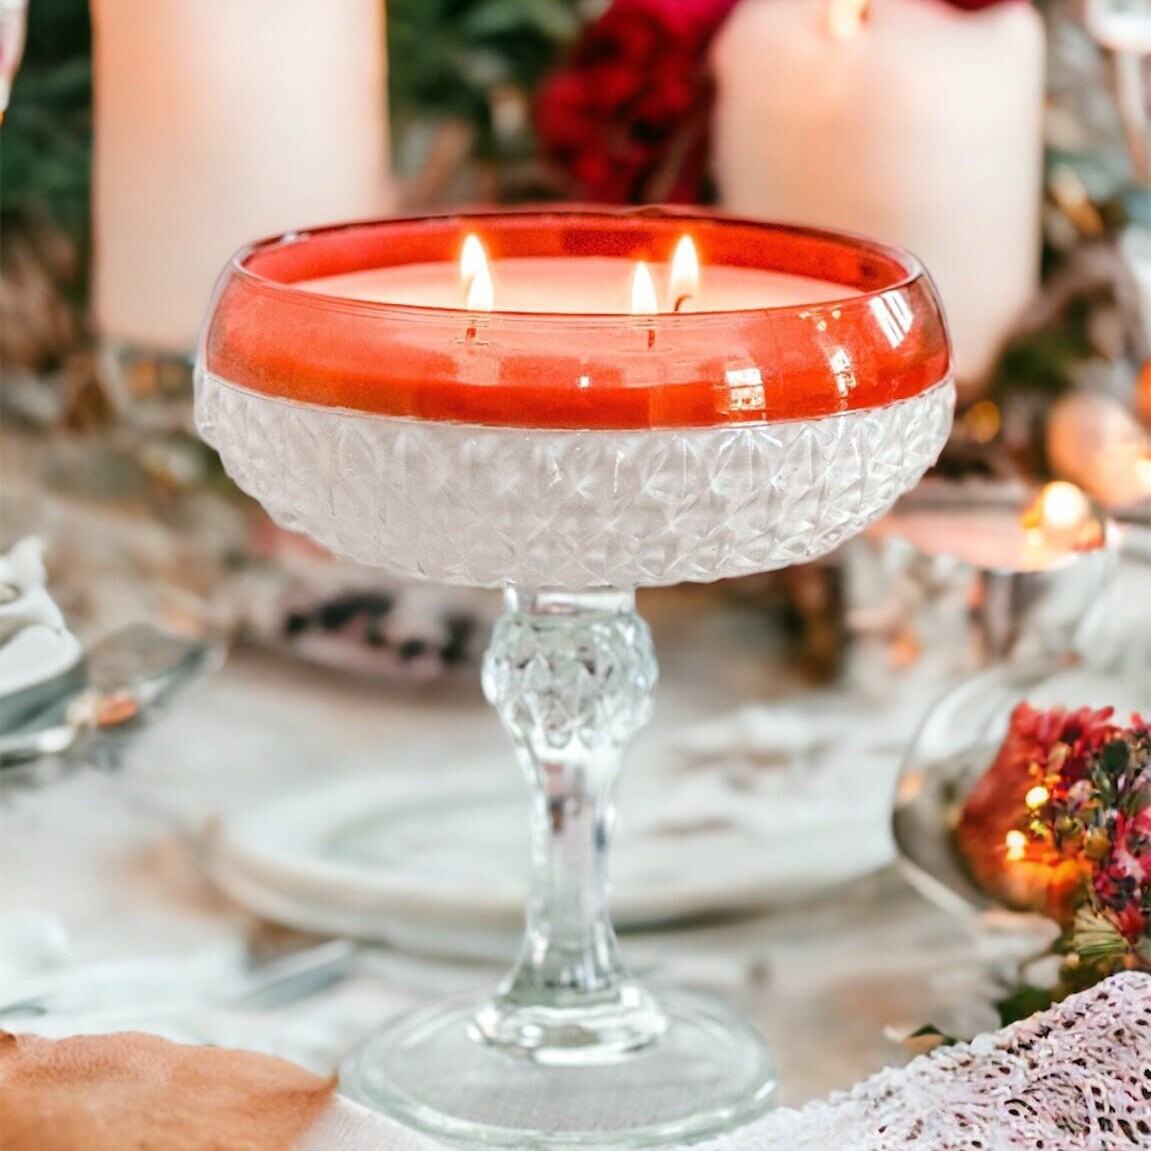 Unique Candles, Vintage, Candy Dish, Best Friend Gifts, Holiday Decor